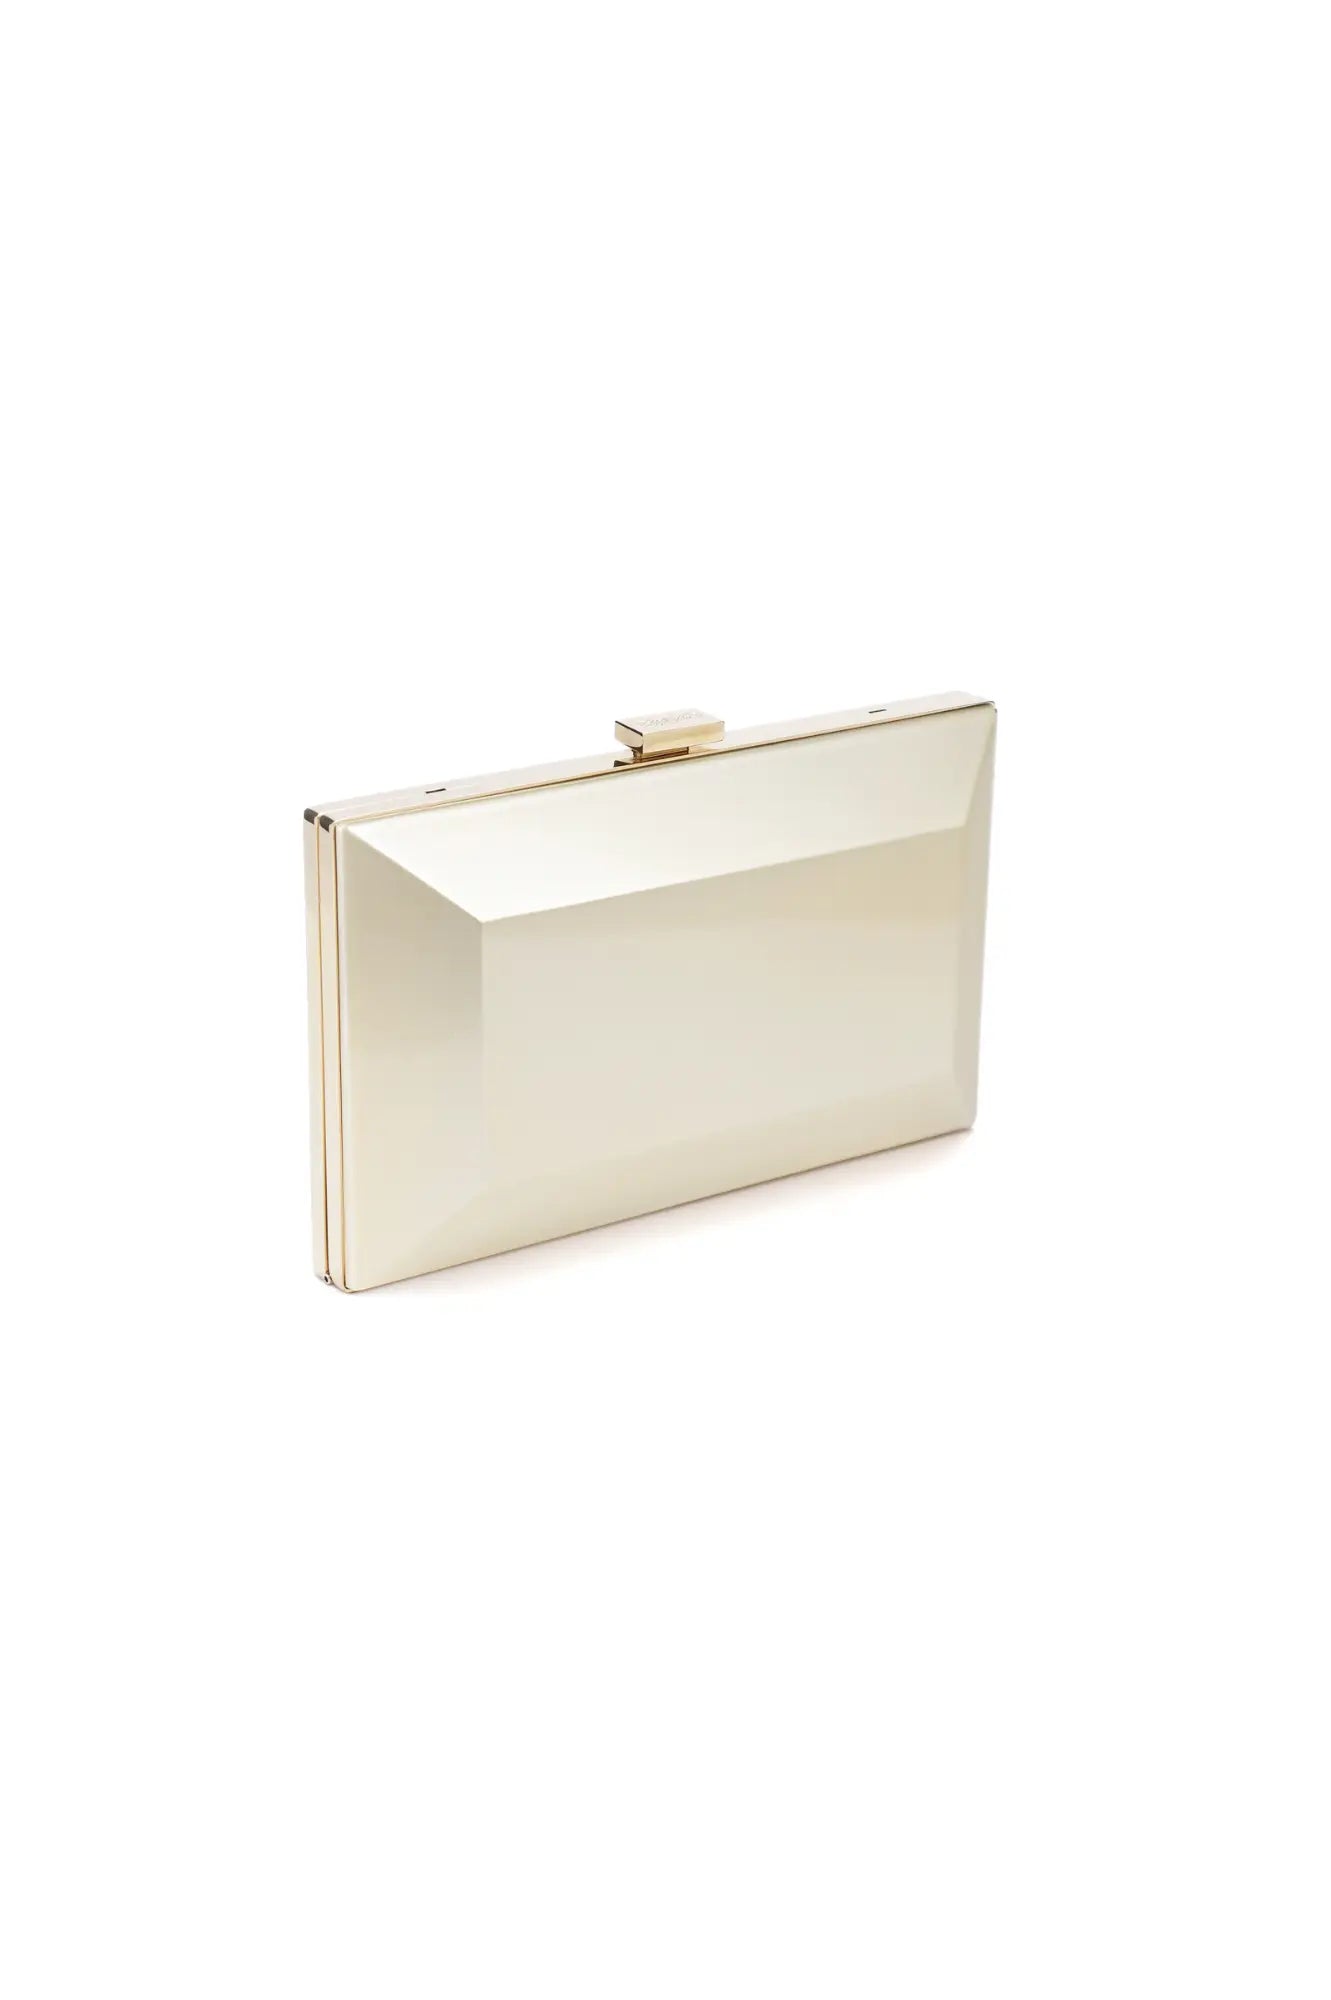 Ivory-colored Milan Clutch x MICAELA - Champagne Shimmer with a gold-tone clasp, crafted by Italian artisans, part of The Bella Rosa Collection.